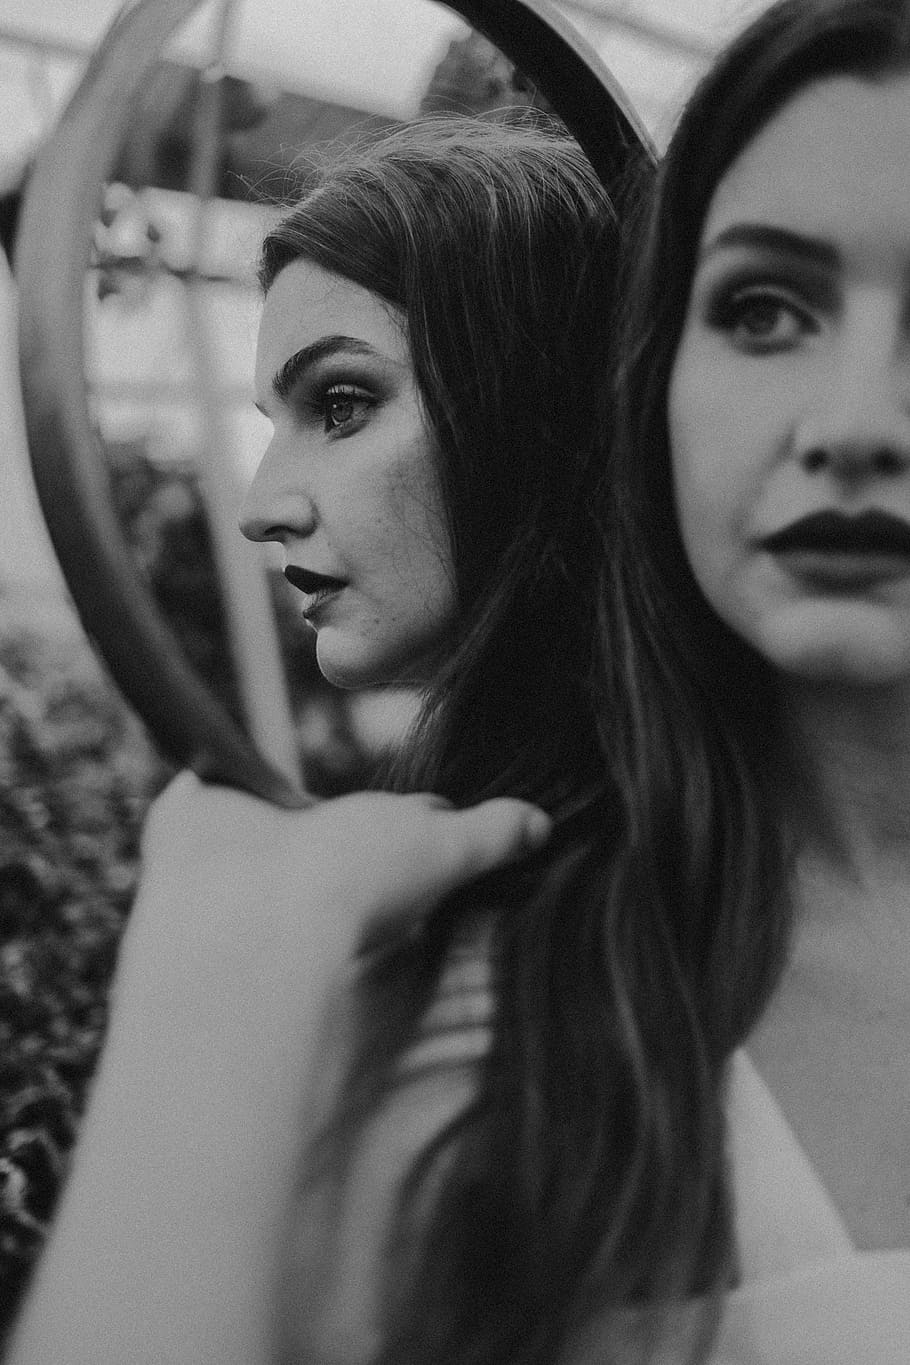 HD wallpaper: grayscale photography of woman reflected on mirror